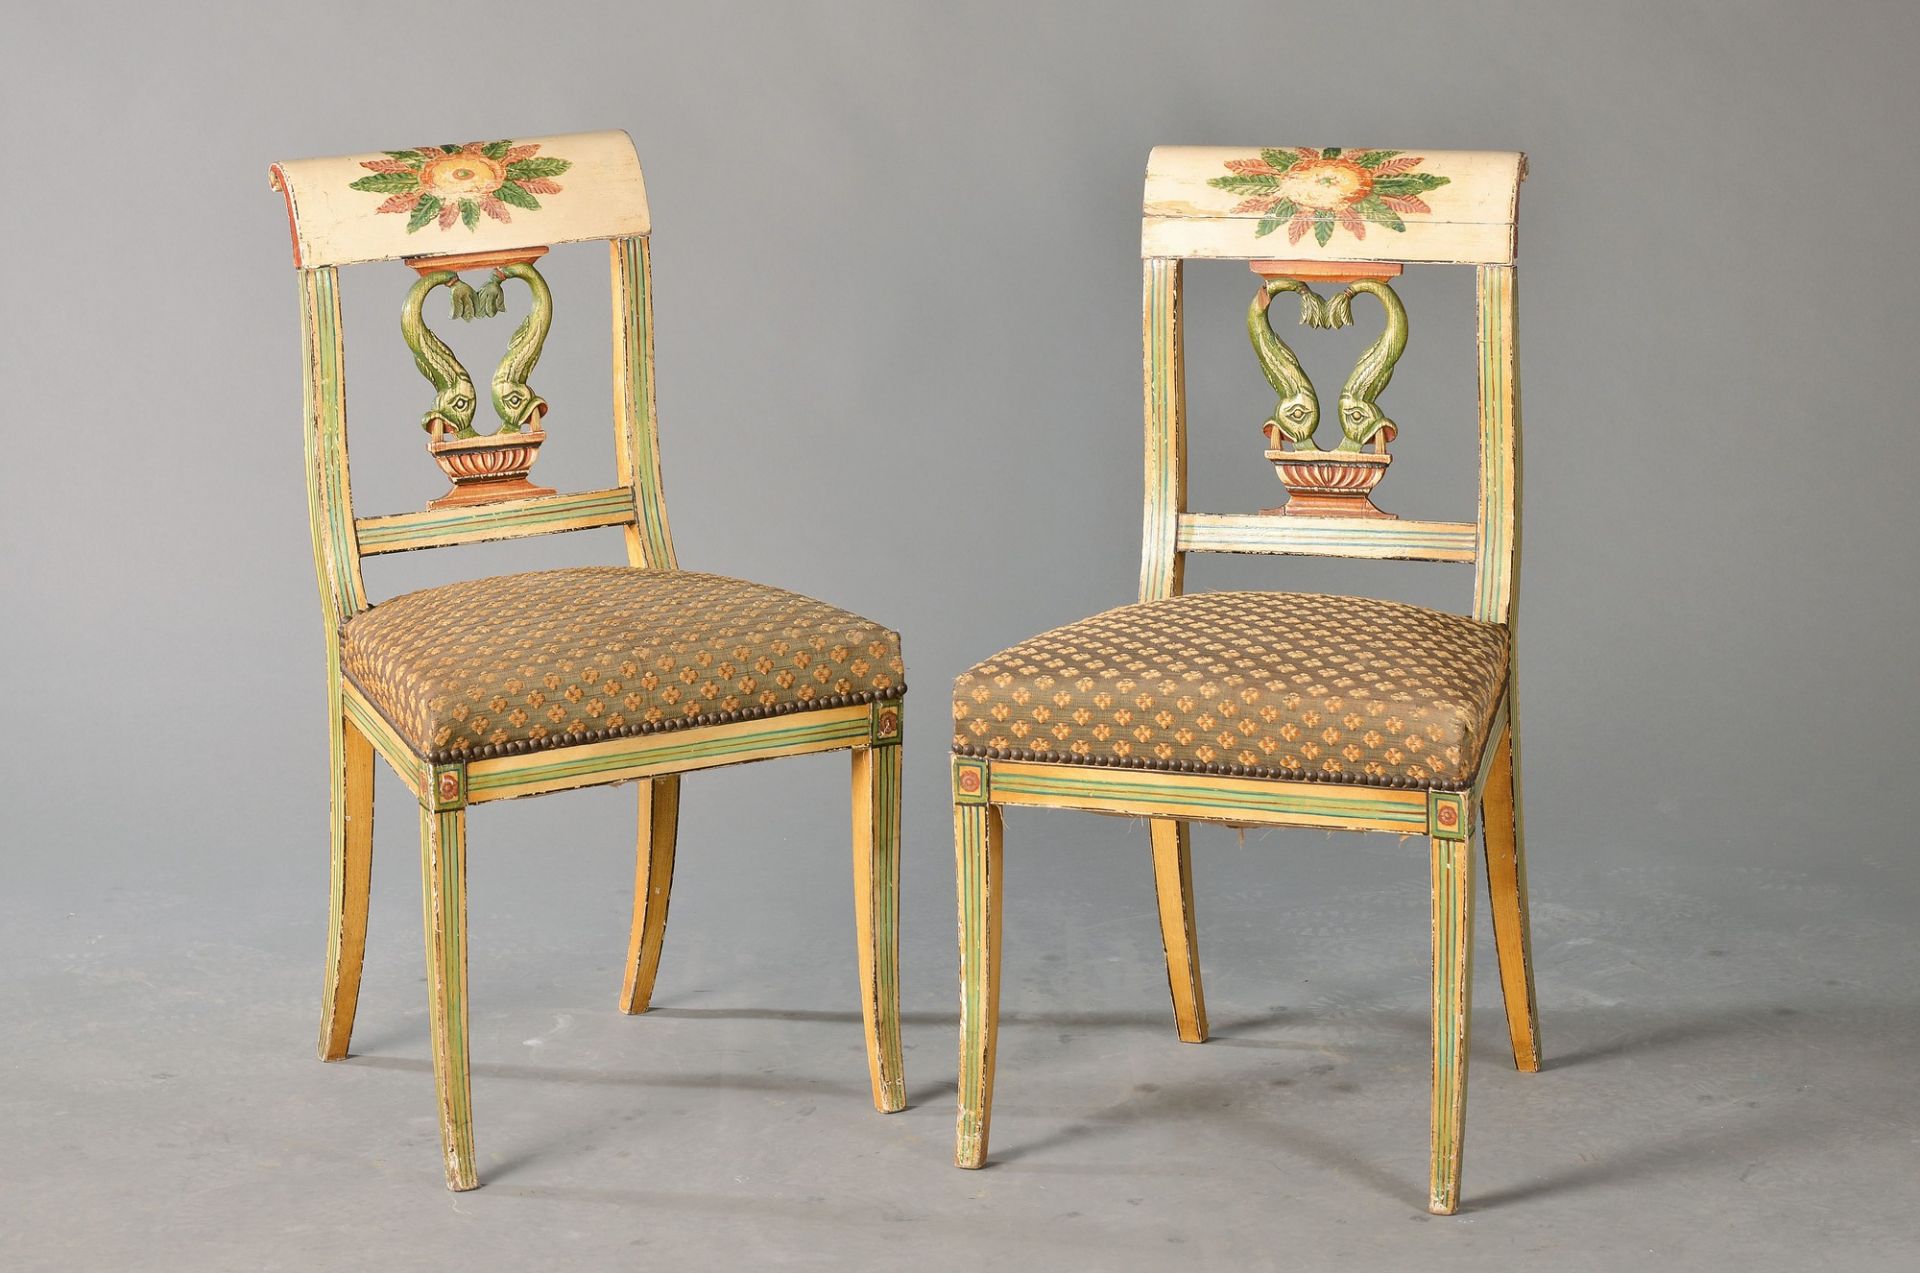 Six chairs, Biedermeier style around 1920, spine with dolphins, colorful painted, traces of age